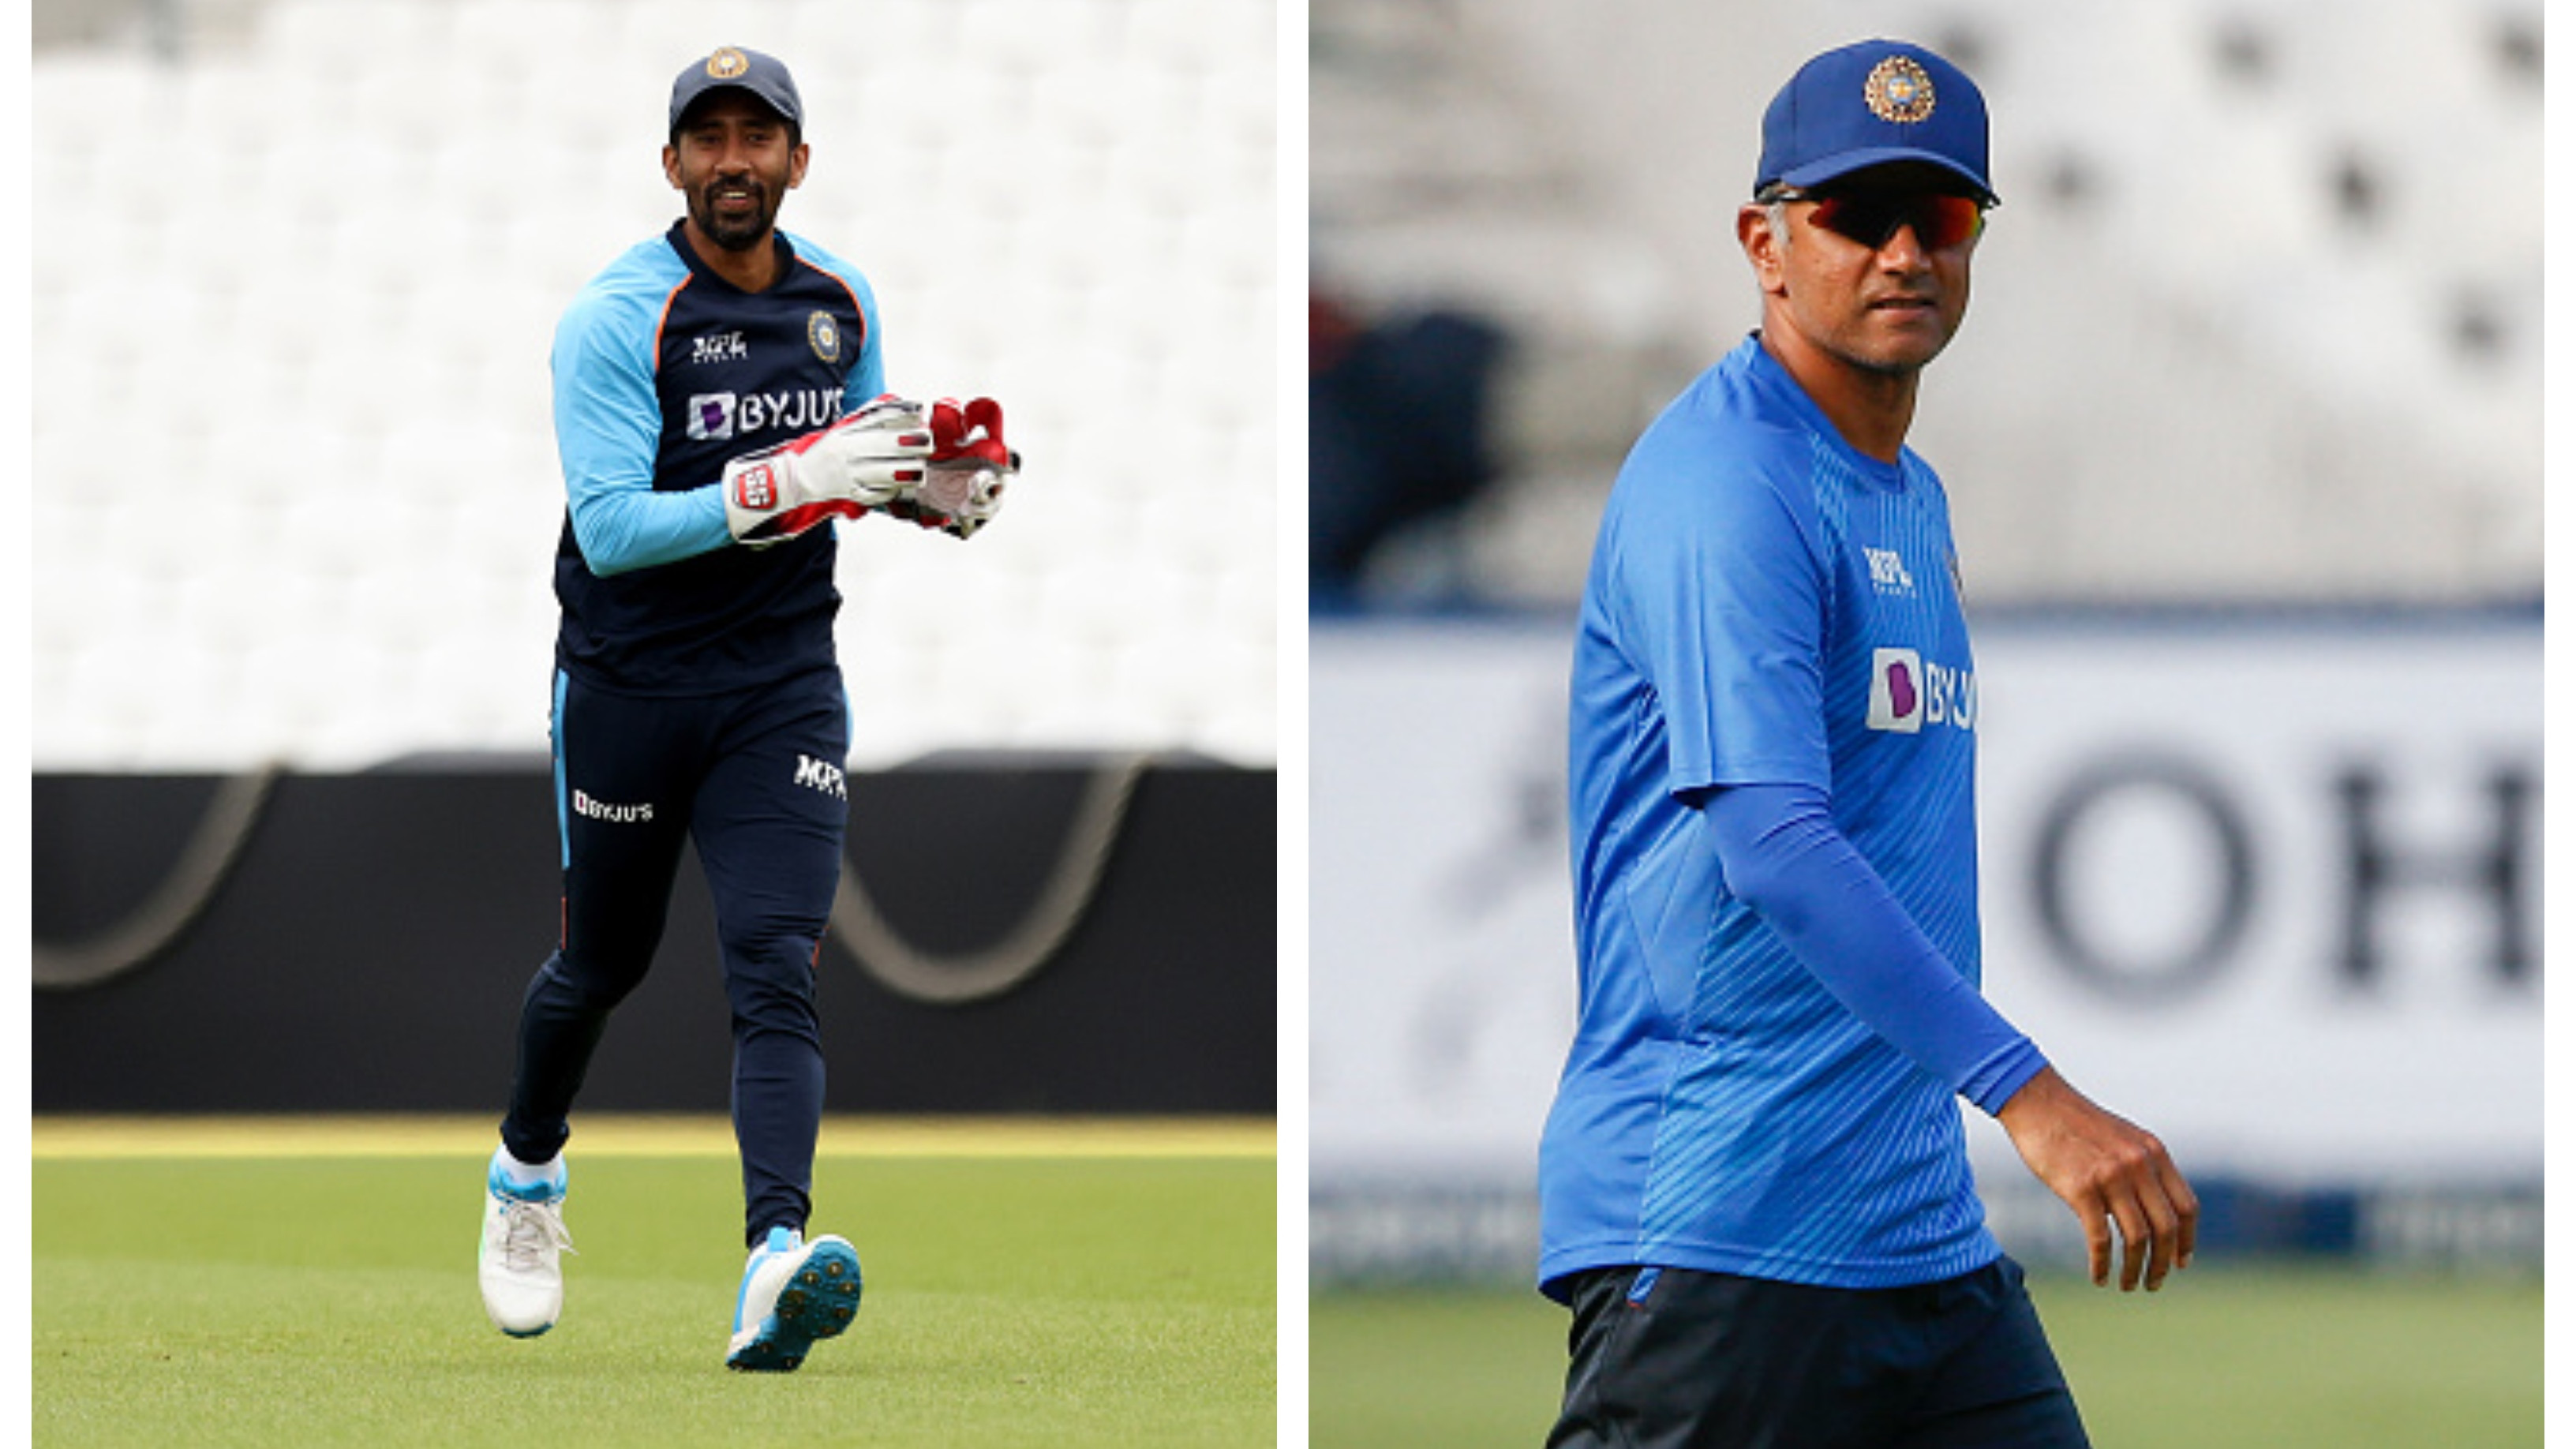 Wriddhiman Saha reveals Rahul Dravid told him he won’t be considered for selection going forward